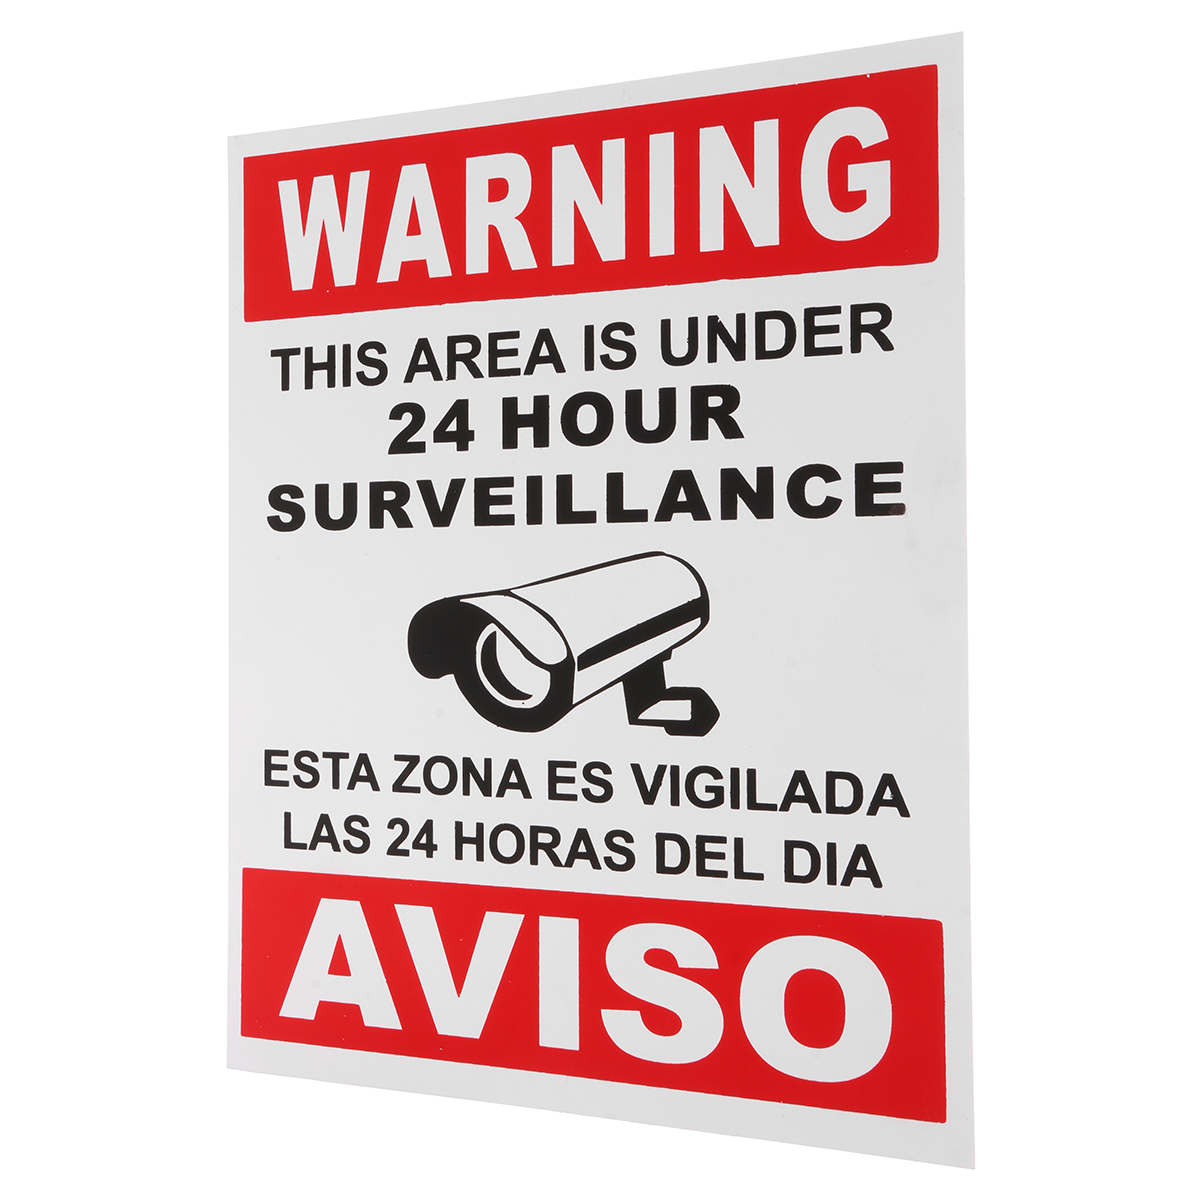 English-Spanish-Security-Warning-Sign-Camera-Sticker-Warning-This-Area-Is-Under-24-Hour-Surveillance-1180753-4